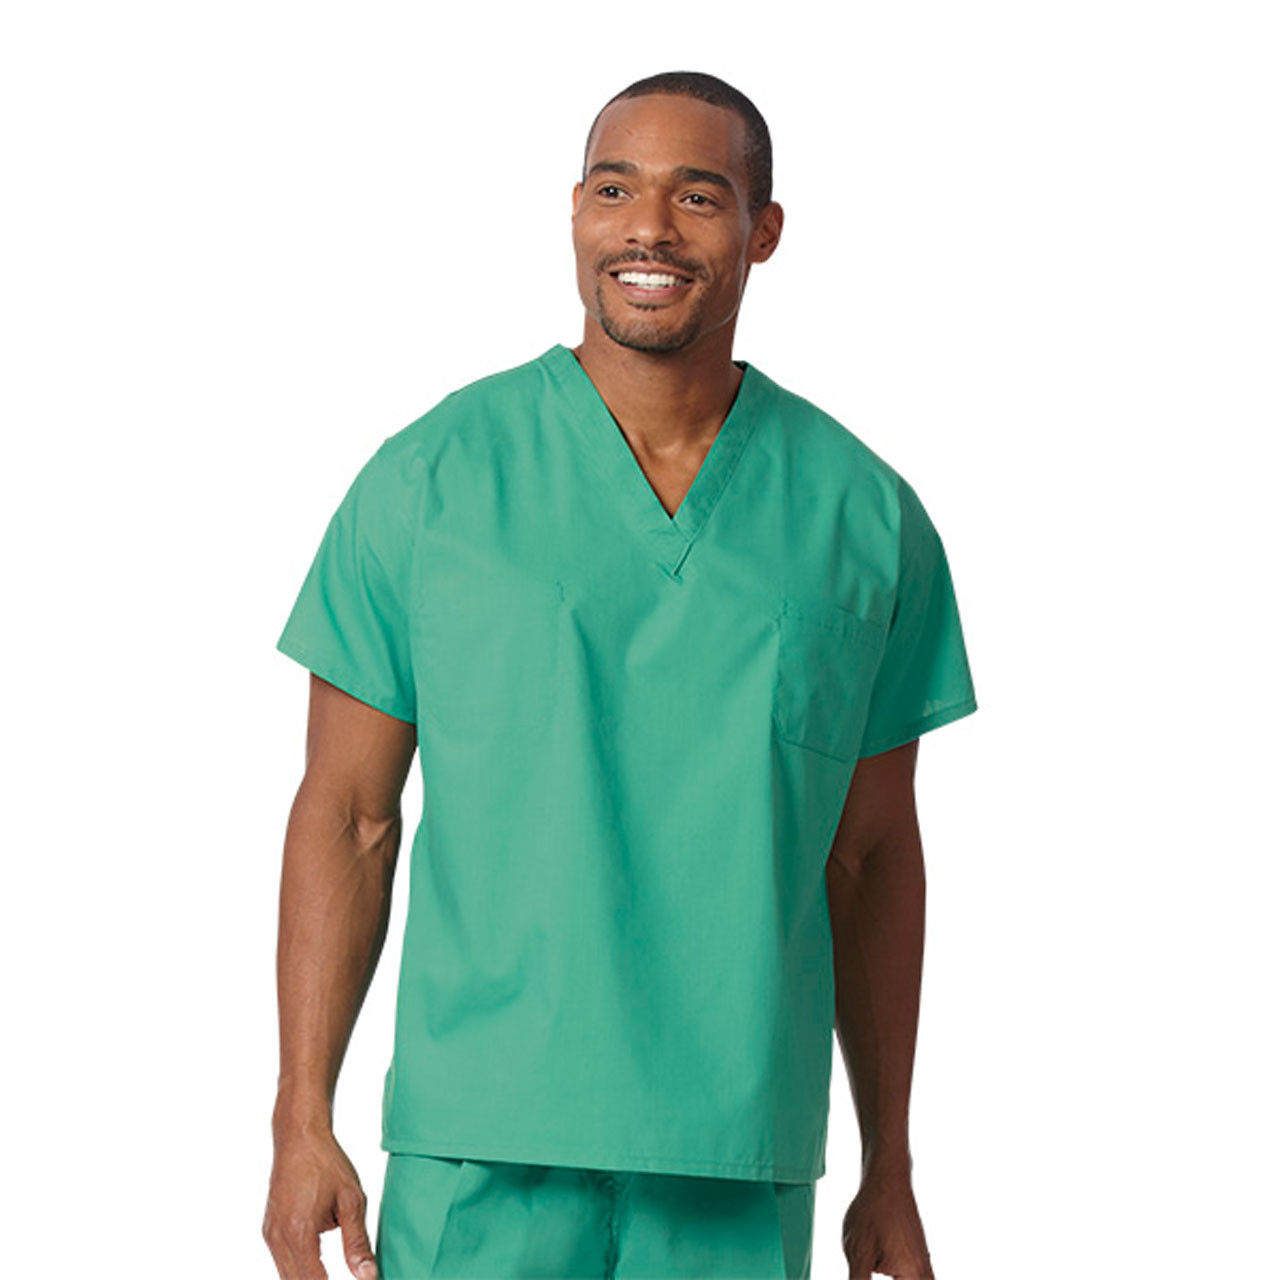 Are these reversible scrubs available in bulk?